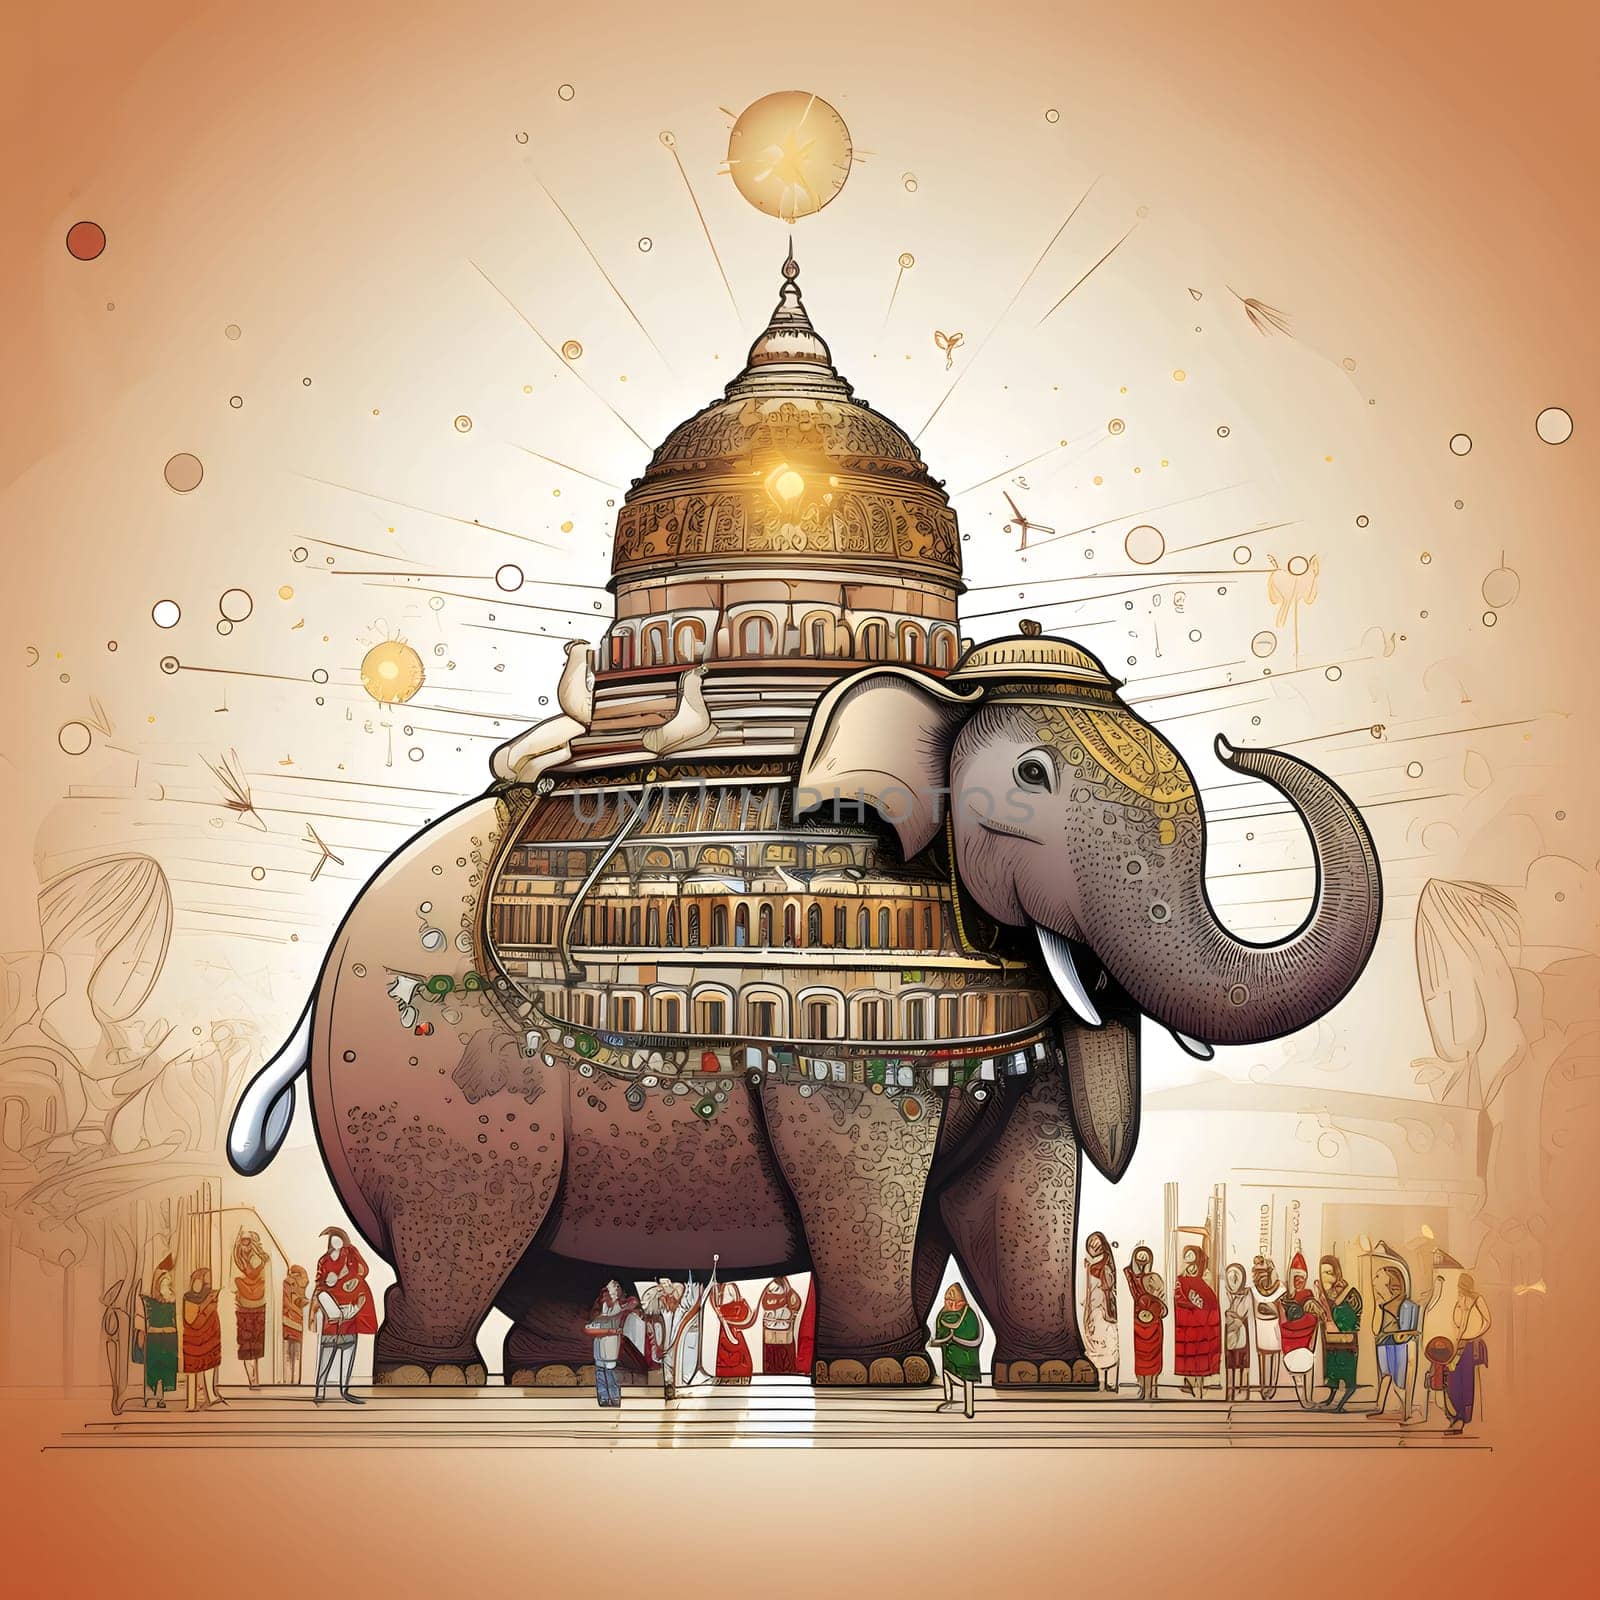 Indian martial elephant around little people festival engraving. Diwali, the dipawali Indian festival of light. An atmosphere of joy and celebration.